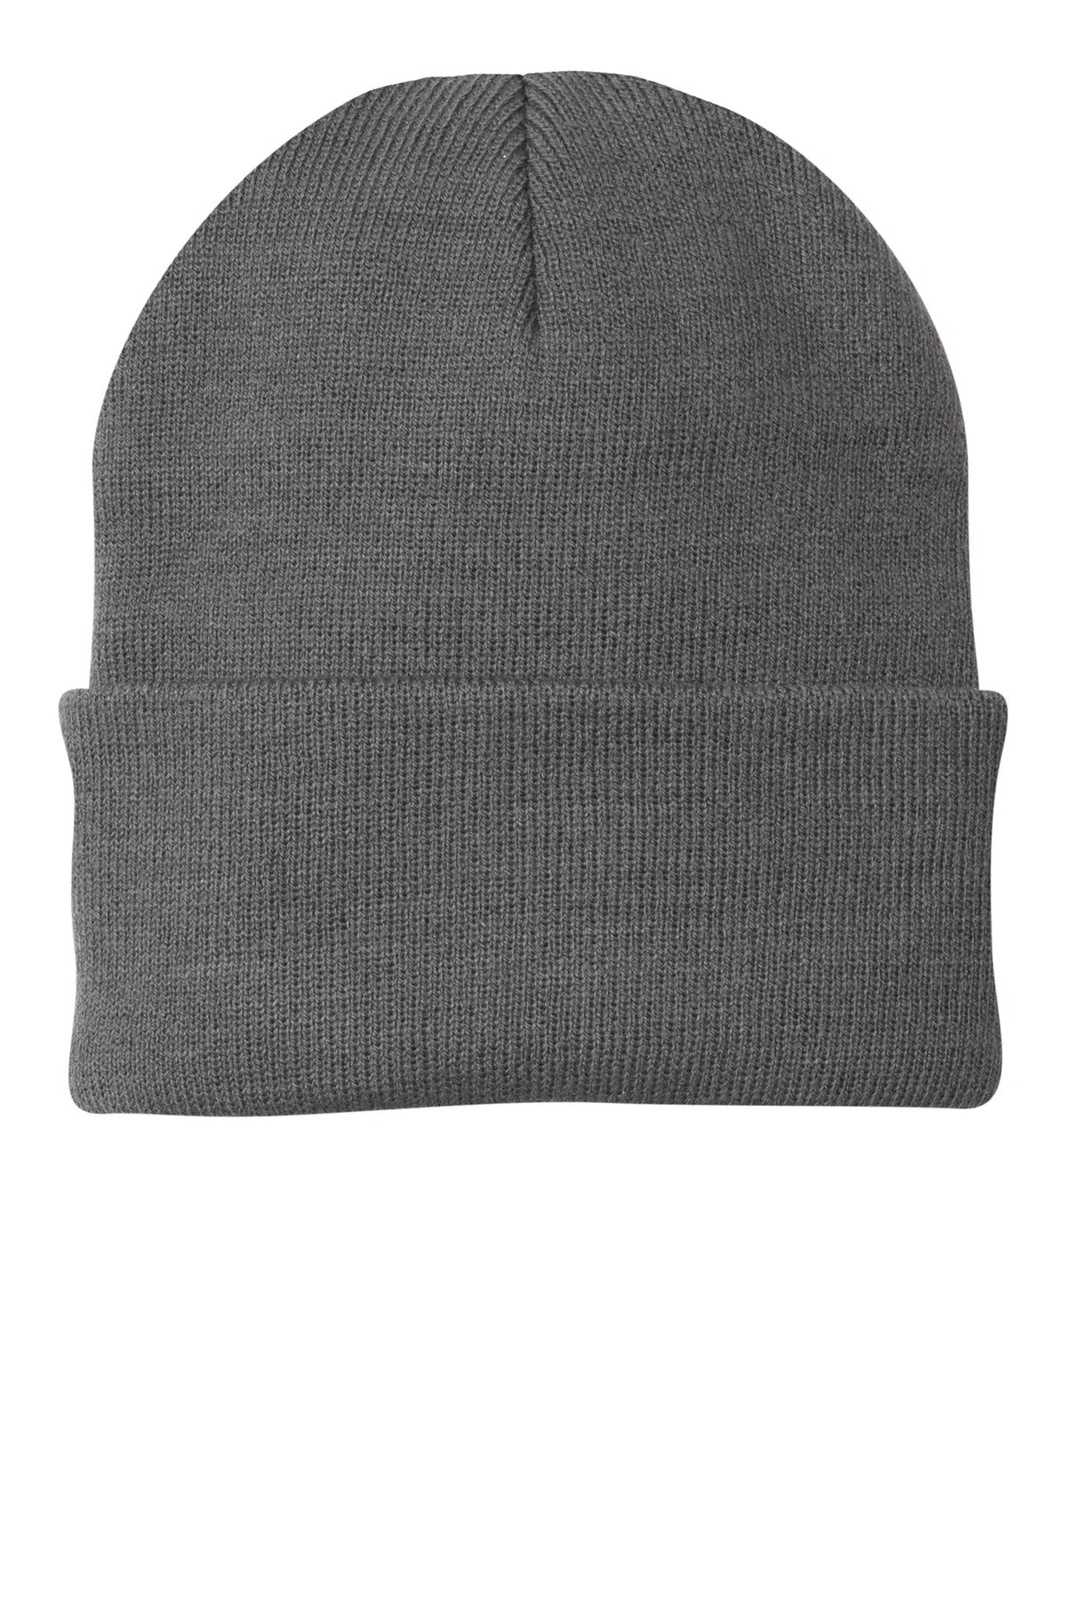 Port & Company CP90 Knit Cap with Cuff - Athletic Oxford - HIT a Double - 1